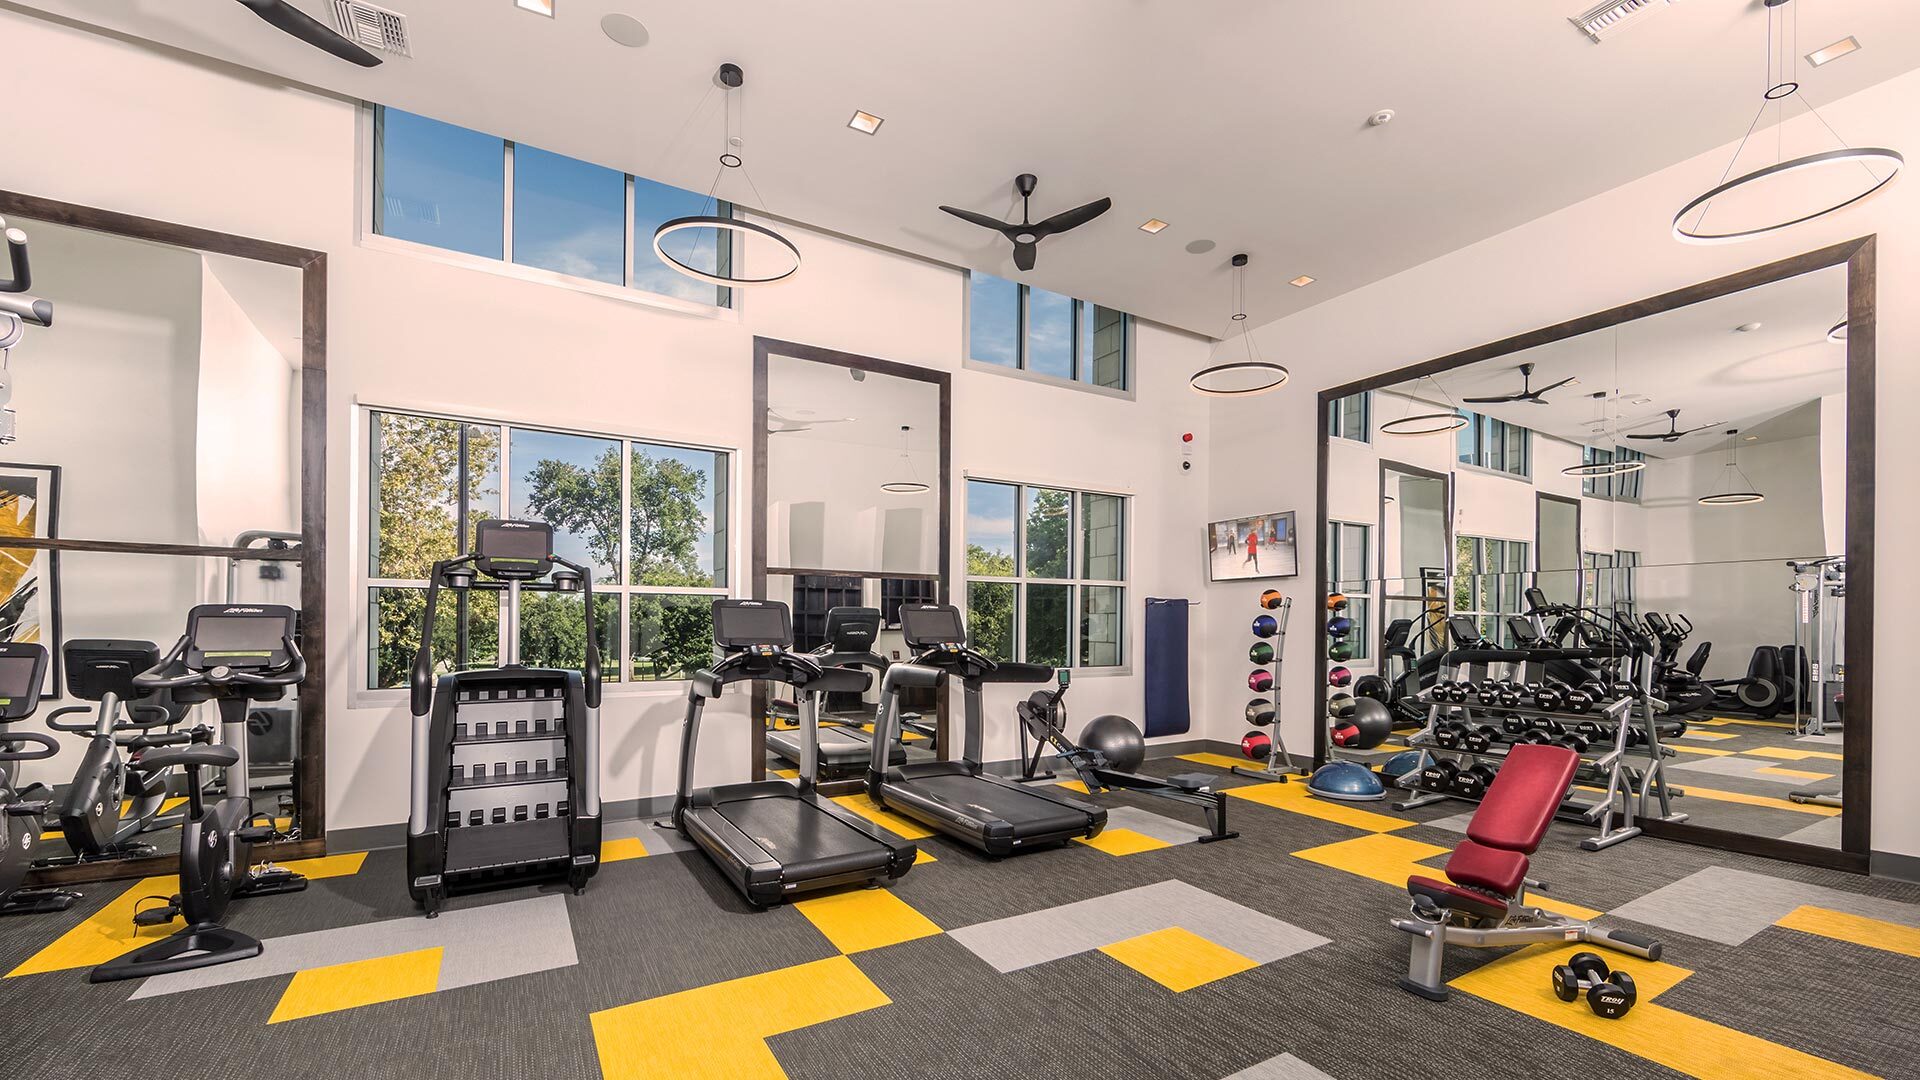 The james fitness center view 1